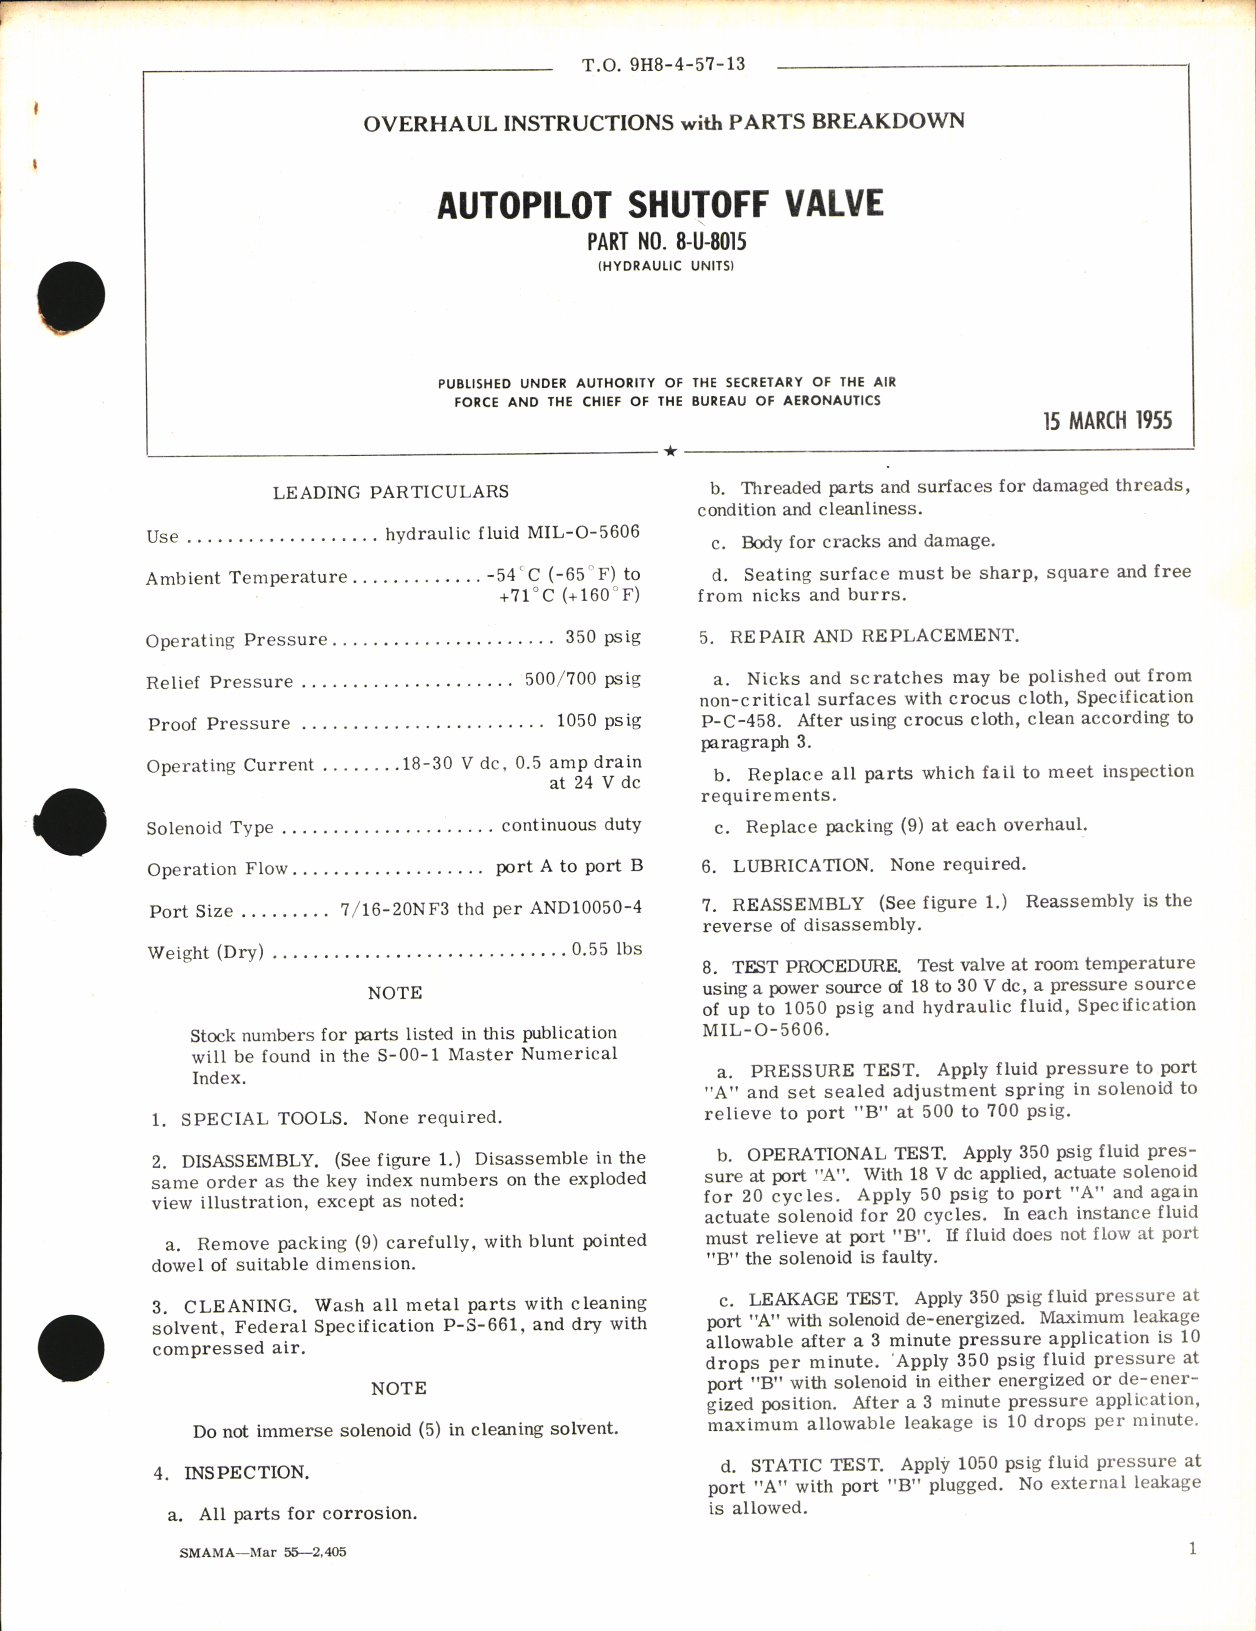 Sample page 1 from AirCorps Library document: Overhaul Instructions with Parts Breakdown for Autopilot Shutoff valve Part No. 8-U-8015